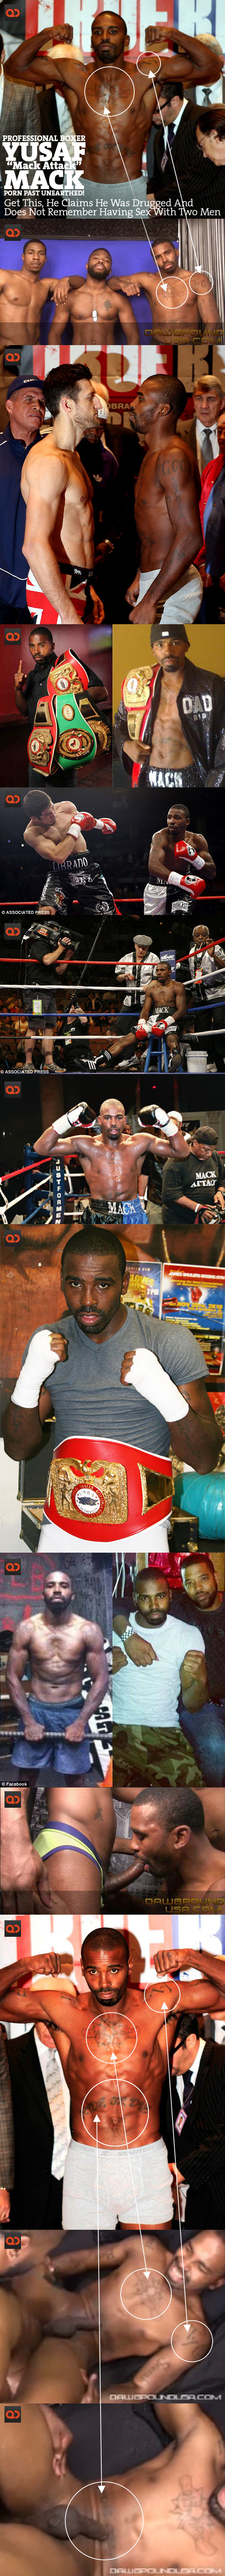 Professional Boxer Yusaf “Mack Attack” Mack Porn Past Unearthed! Claims He Was Drugged, Does Not Remember Having Sex With Two Men